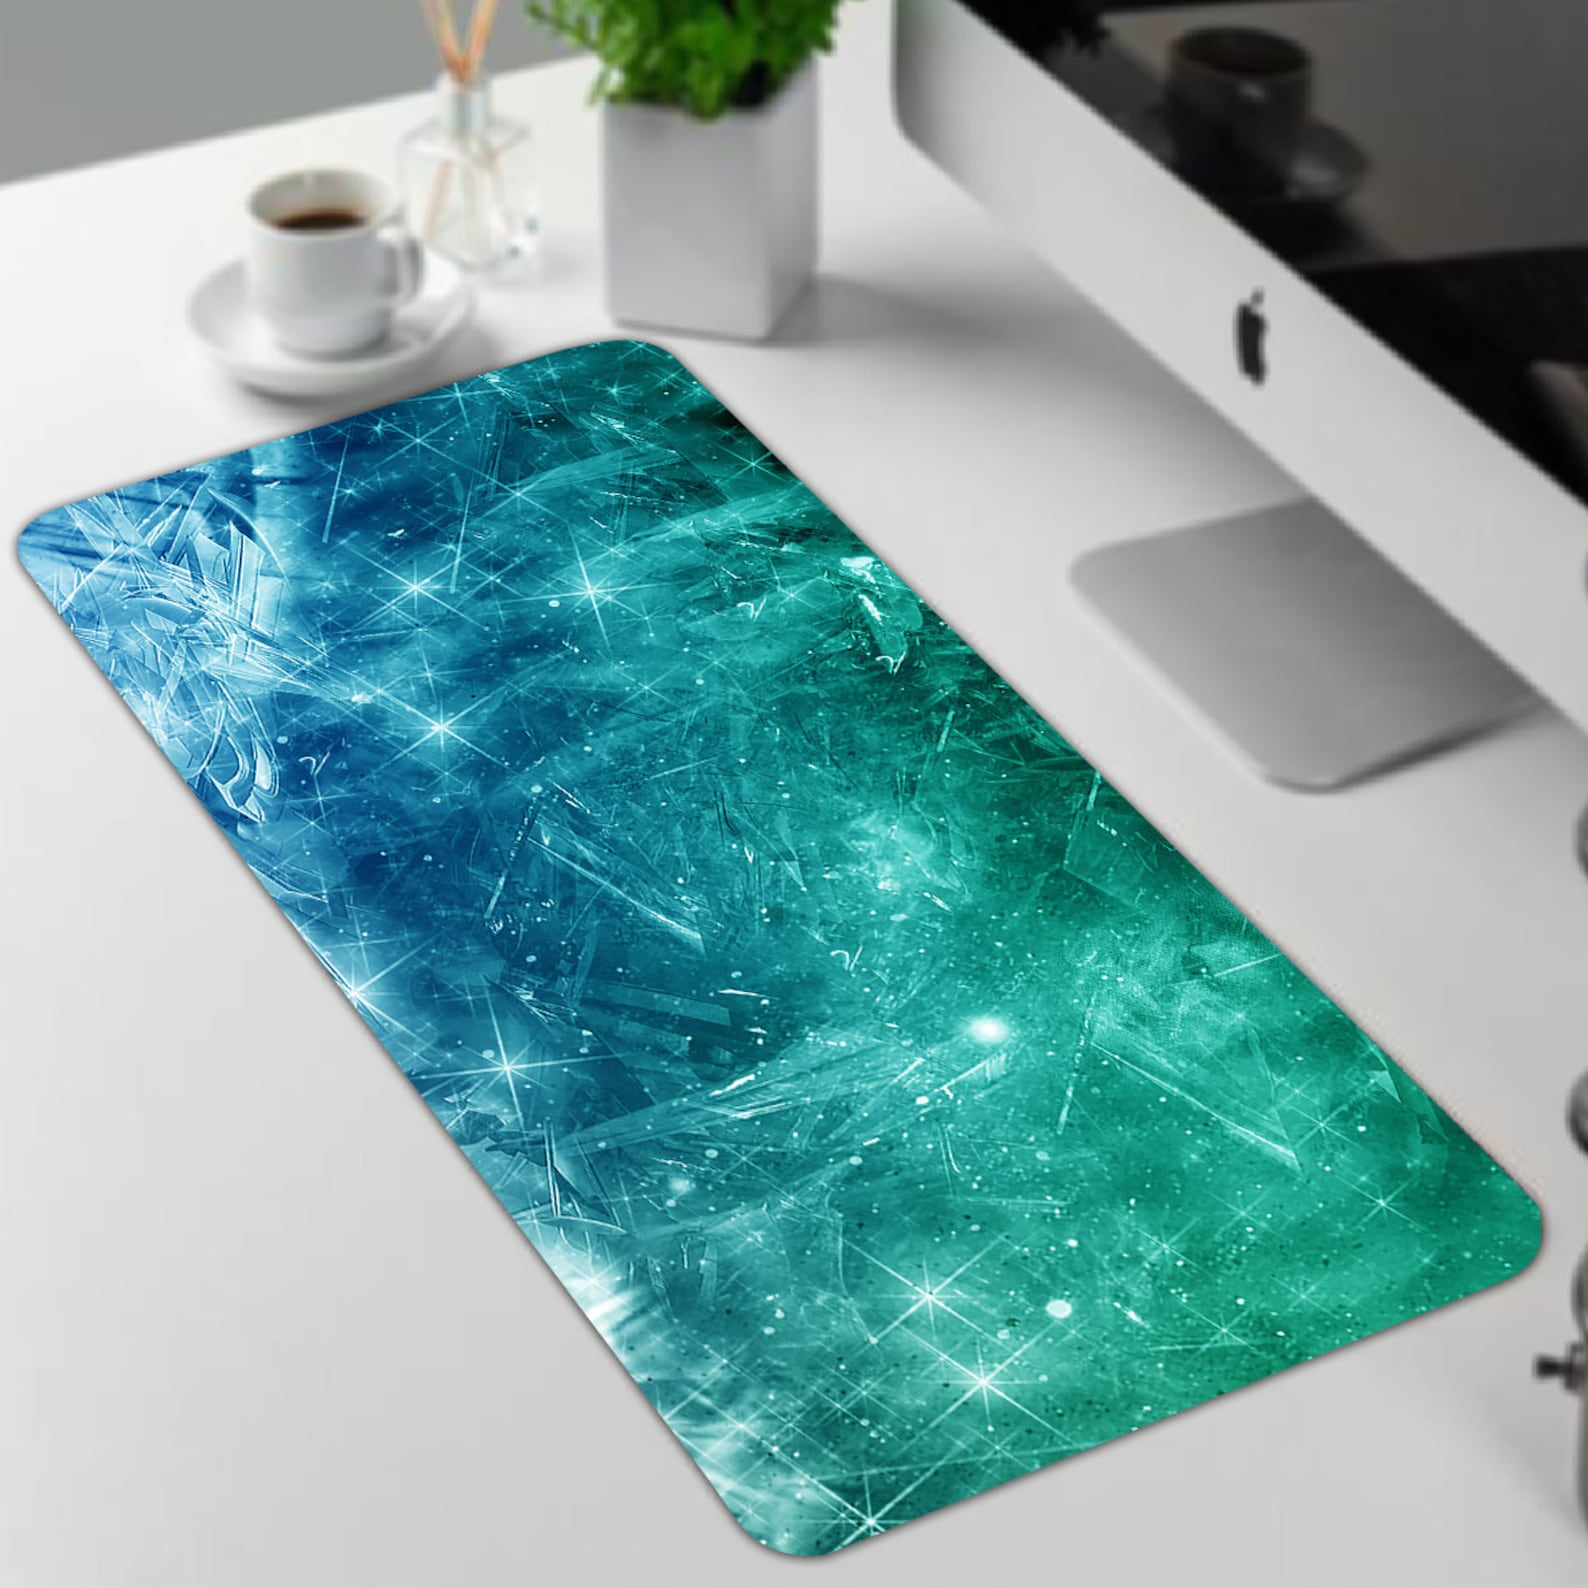 Abstract Mouse pads Colorful Large Desk Pad Art Pattern | Etsy